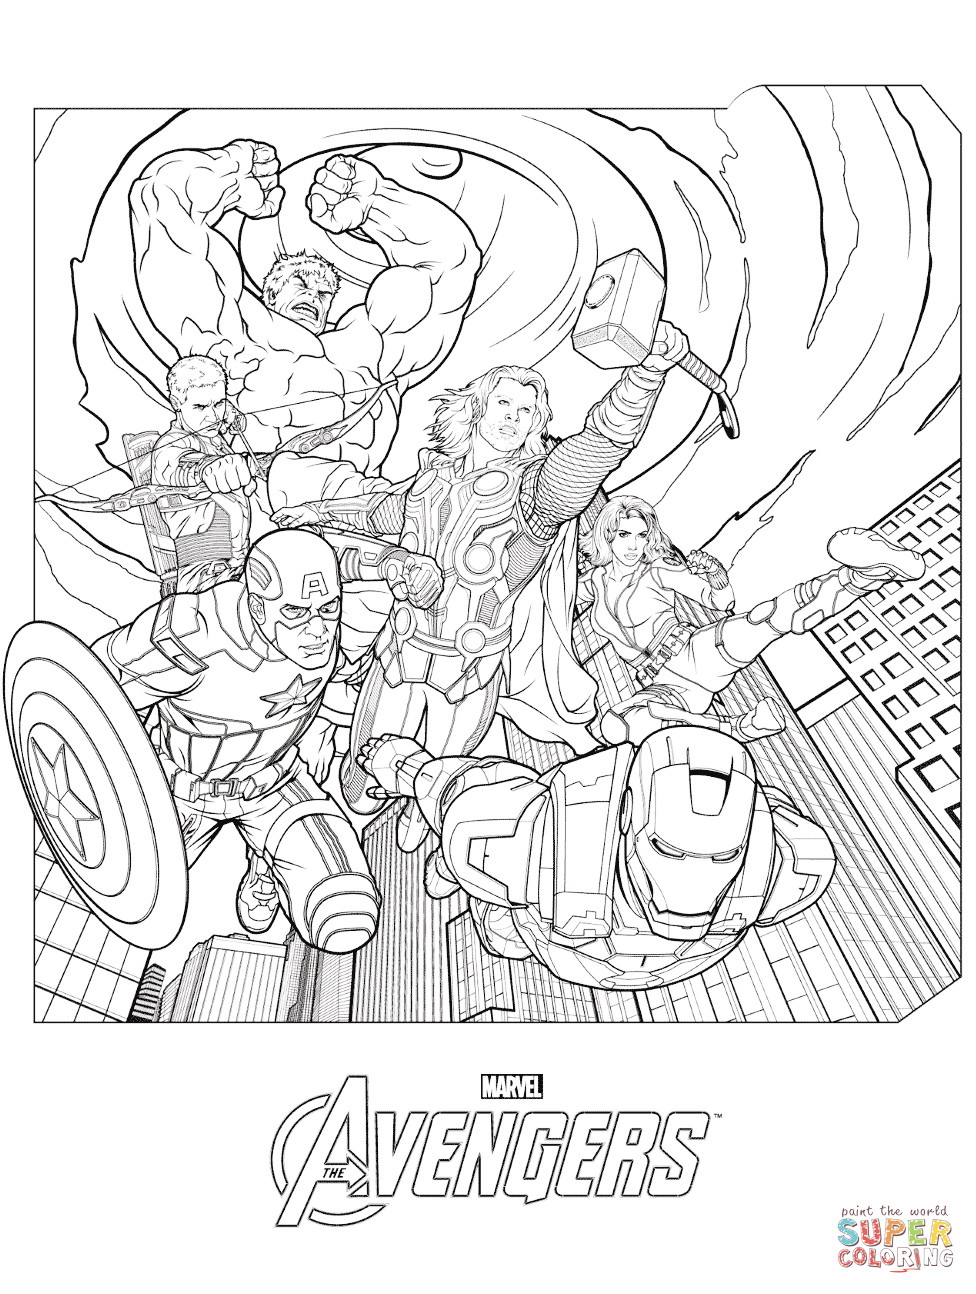 Printable Avengers Coloring Pages
 Marvel Avengers coloring page